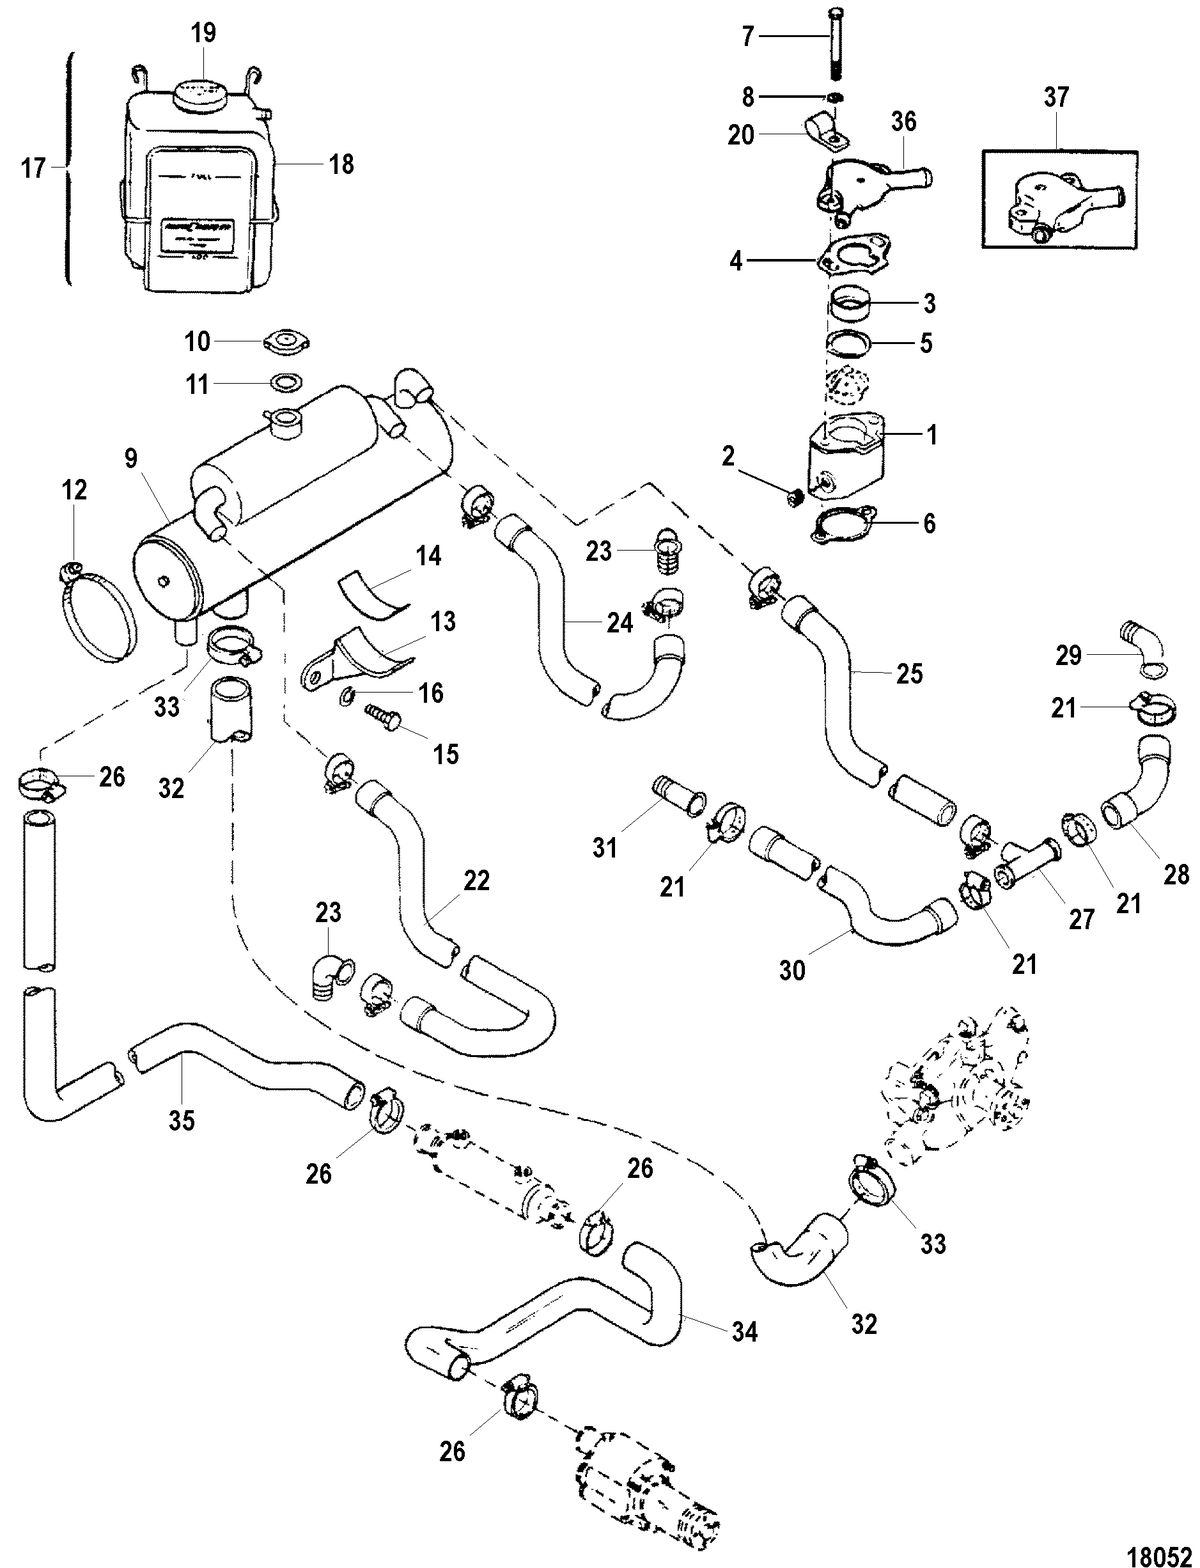 ACCESSORIES EXHAUST/COOLING SYSTEMS AND EXTENSION KITS Closed Cooling System(78094A 2)